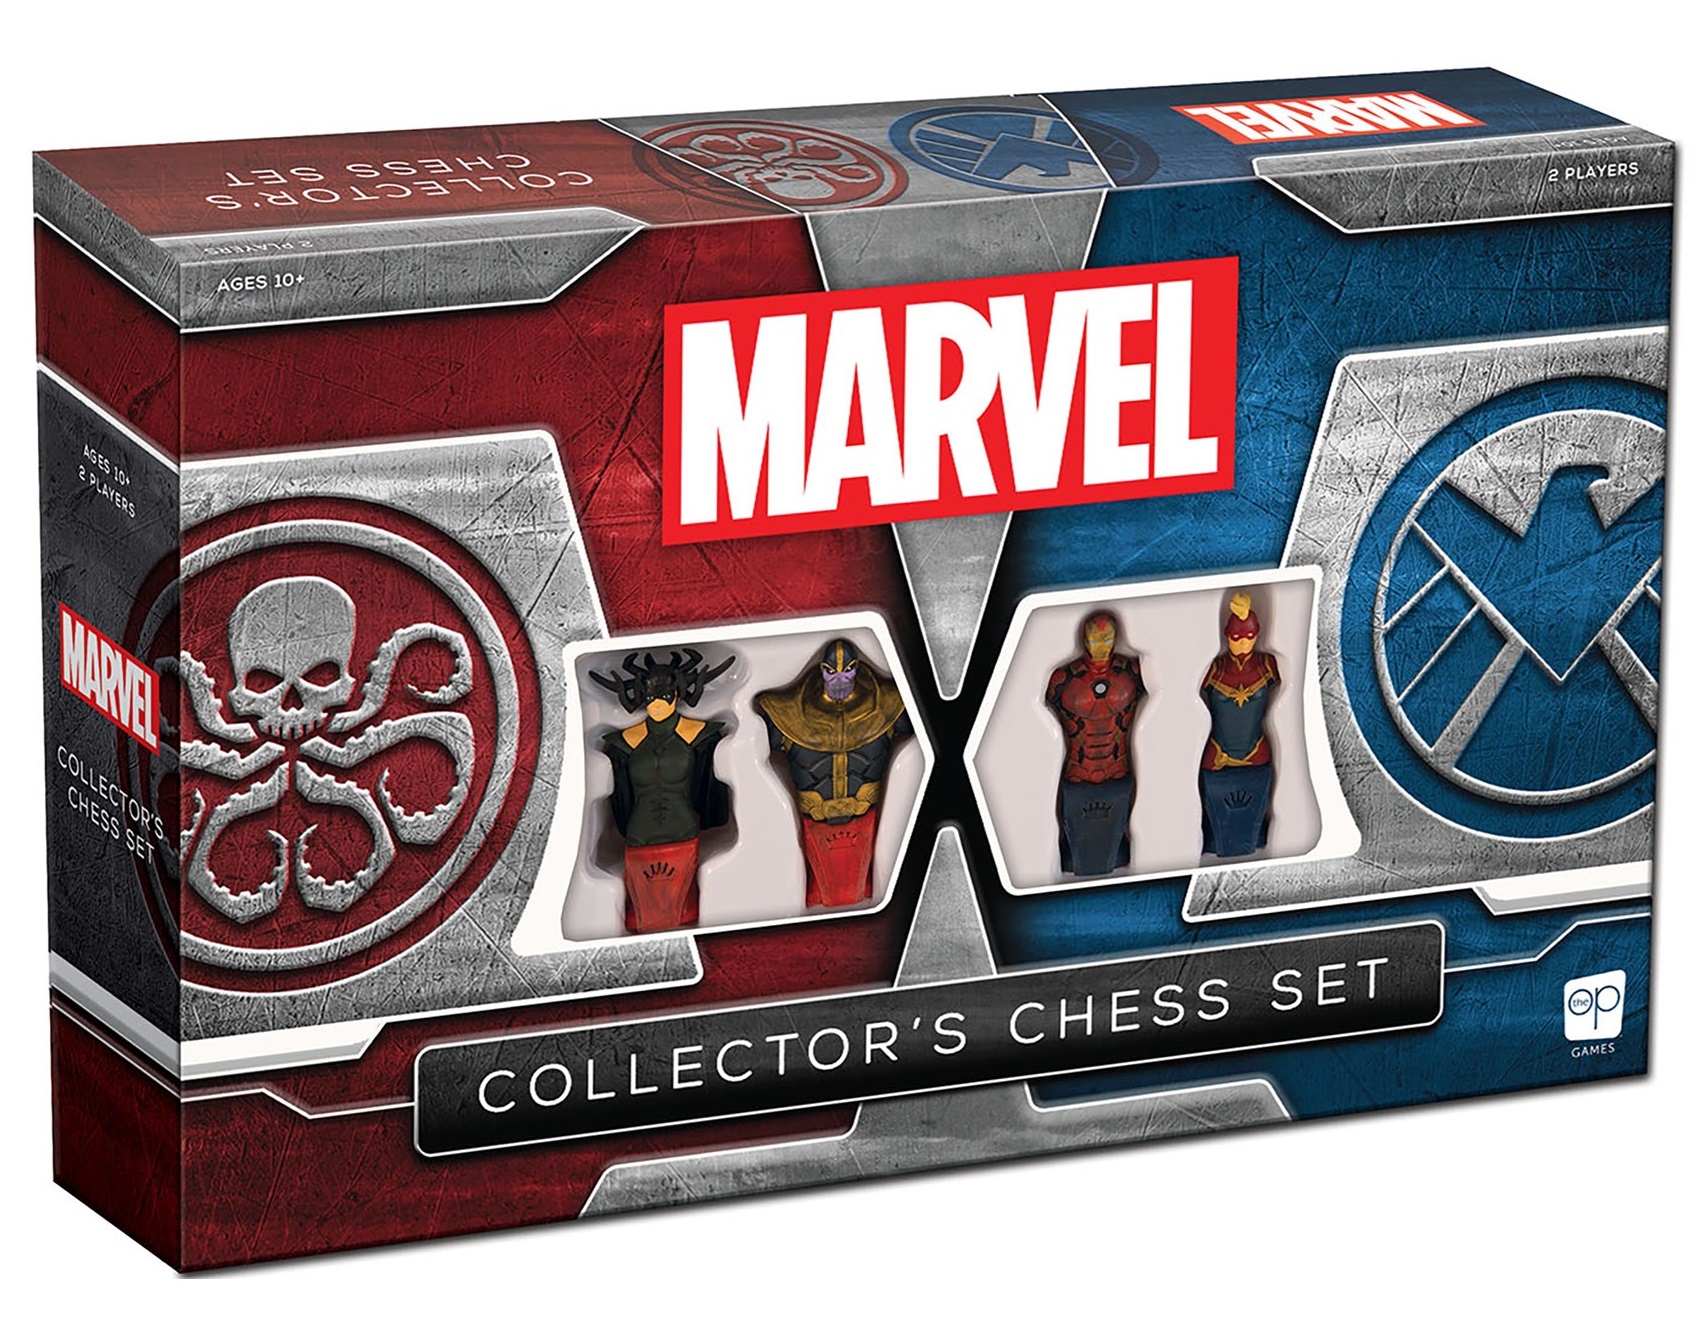 Marvel: Collector's Chess Set